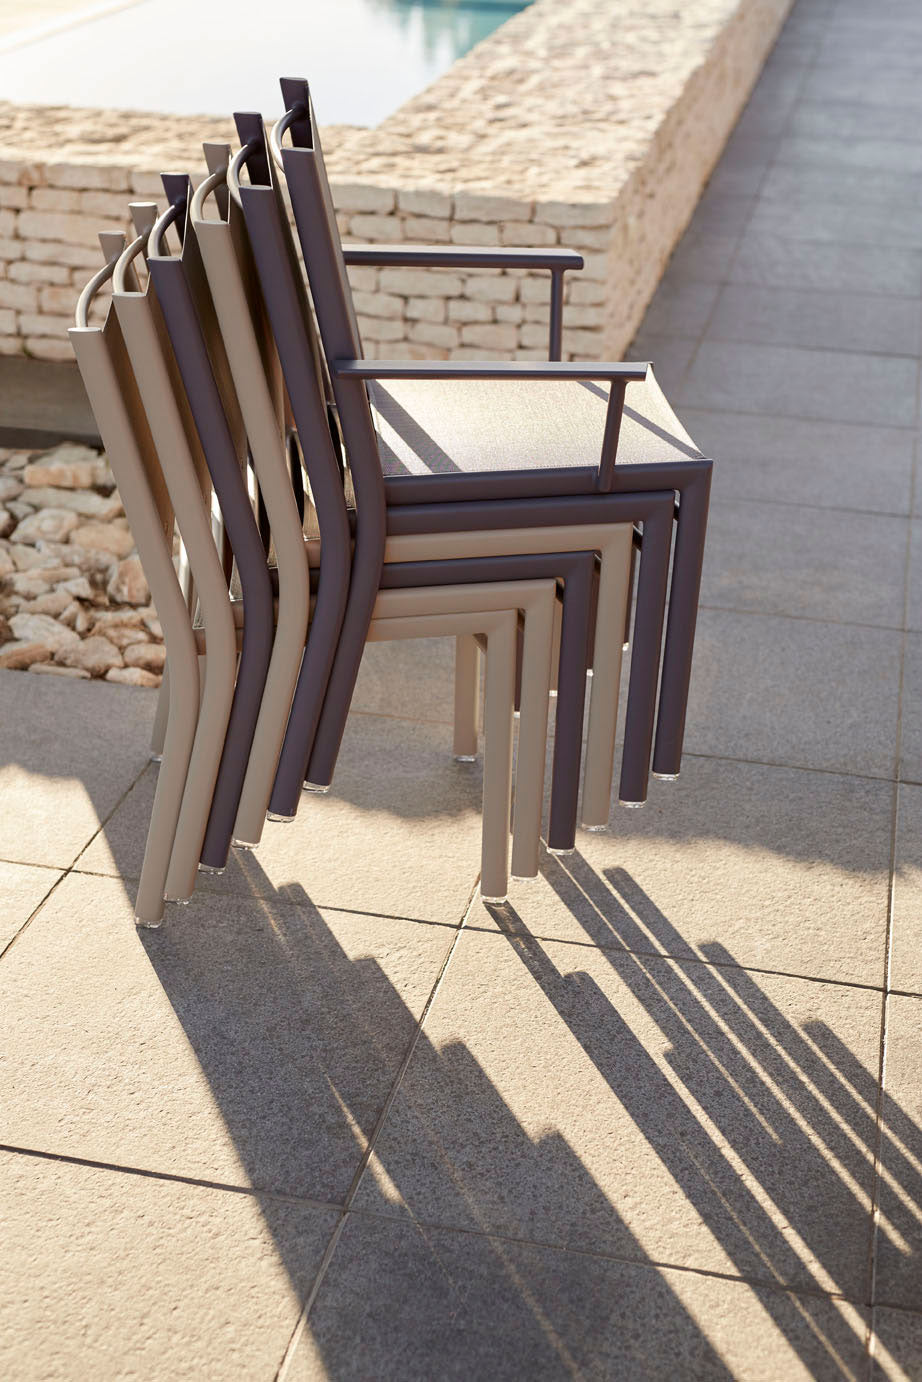 Fermob Costa Stacking Chairs in Nutmeg & Plum